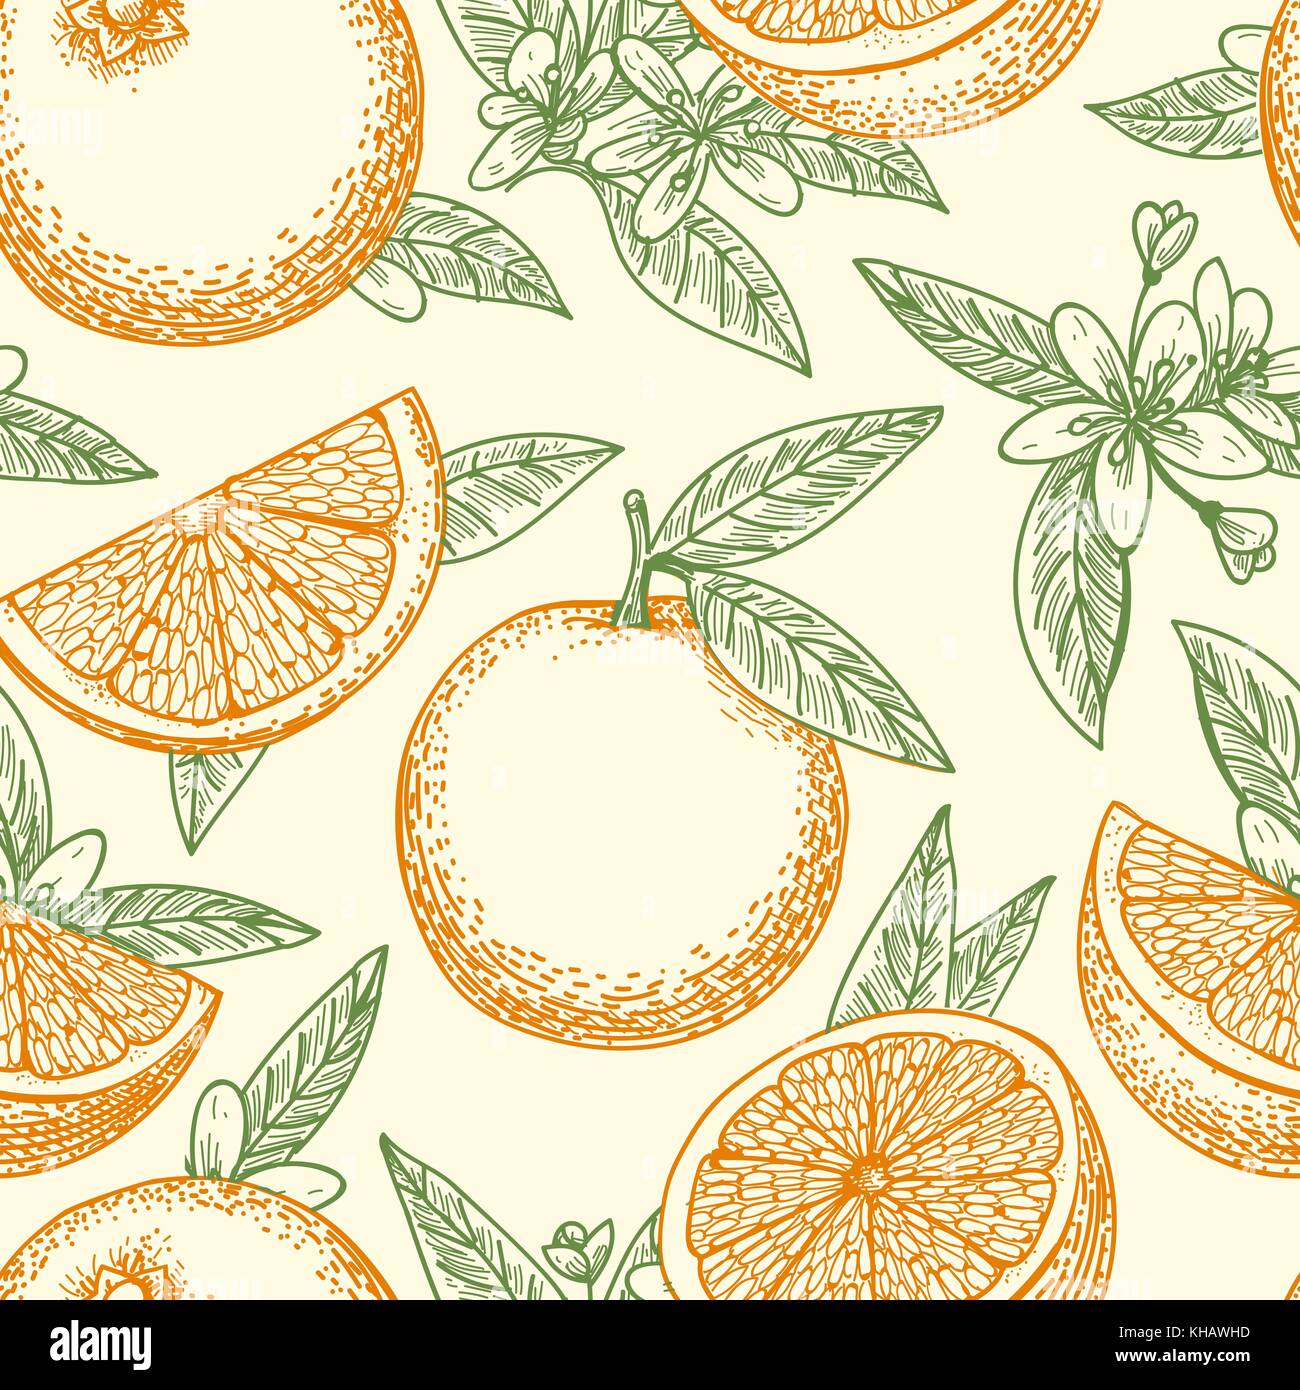 Orange fruit hand drawn pattern. Yellow oranges, green leaves and flowers seamless background pattern vector drawing Stock Vector